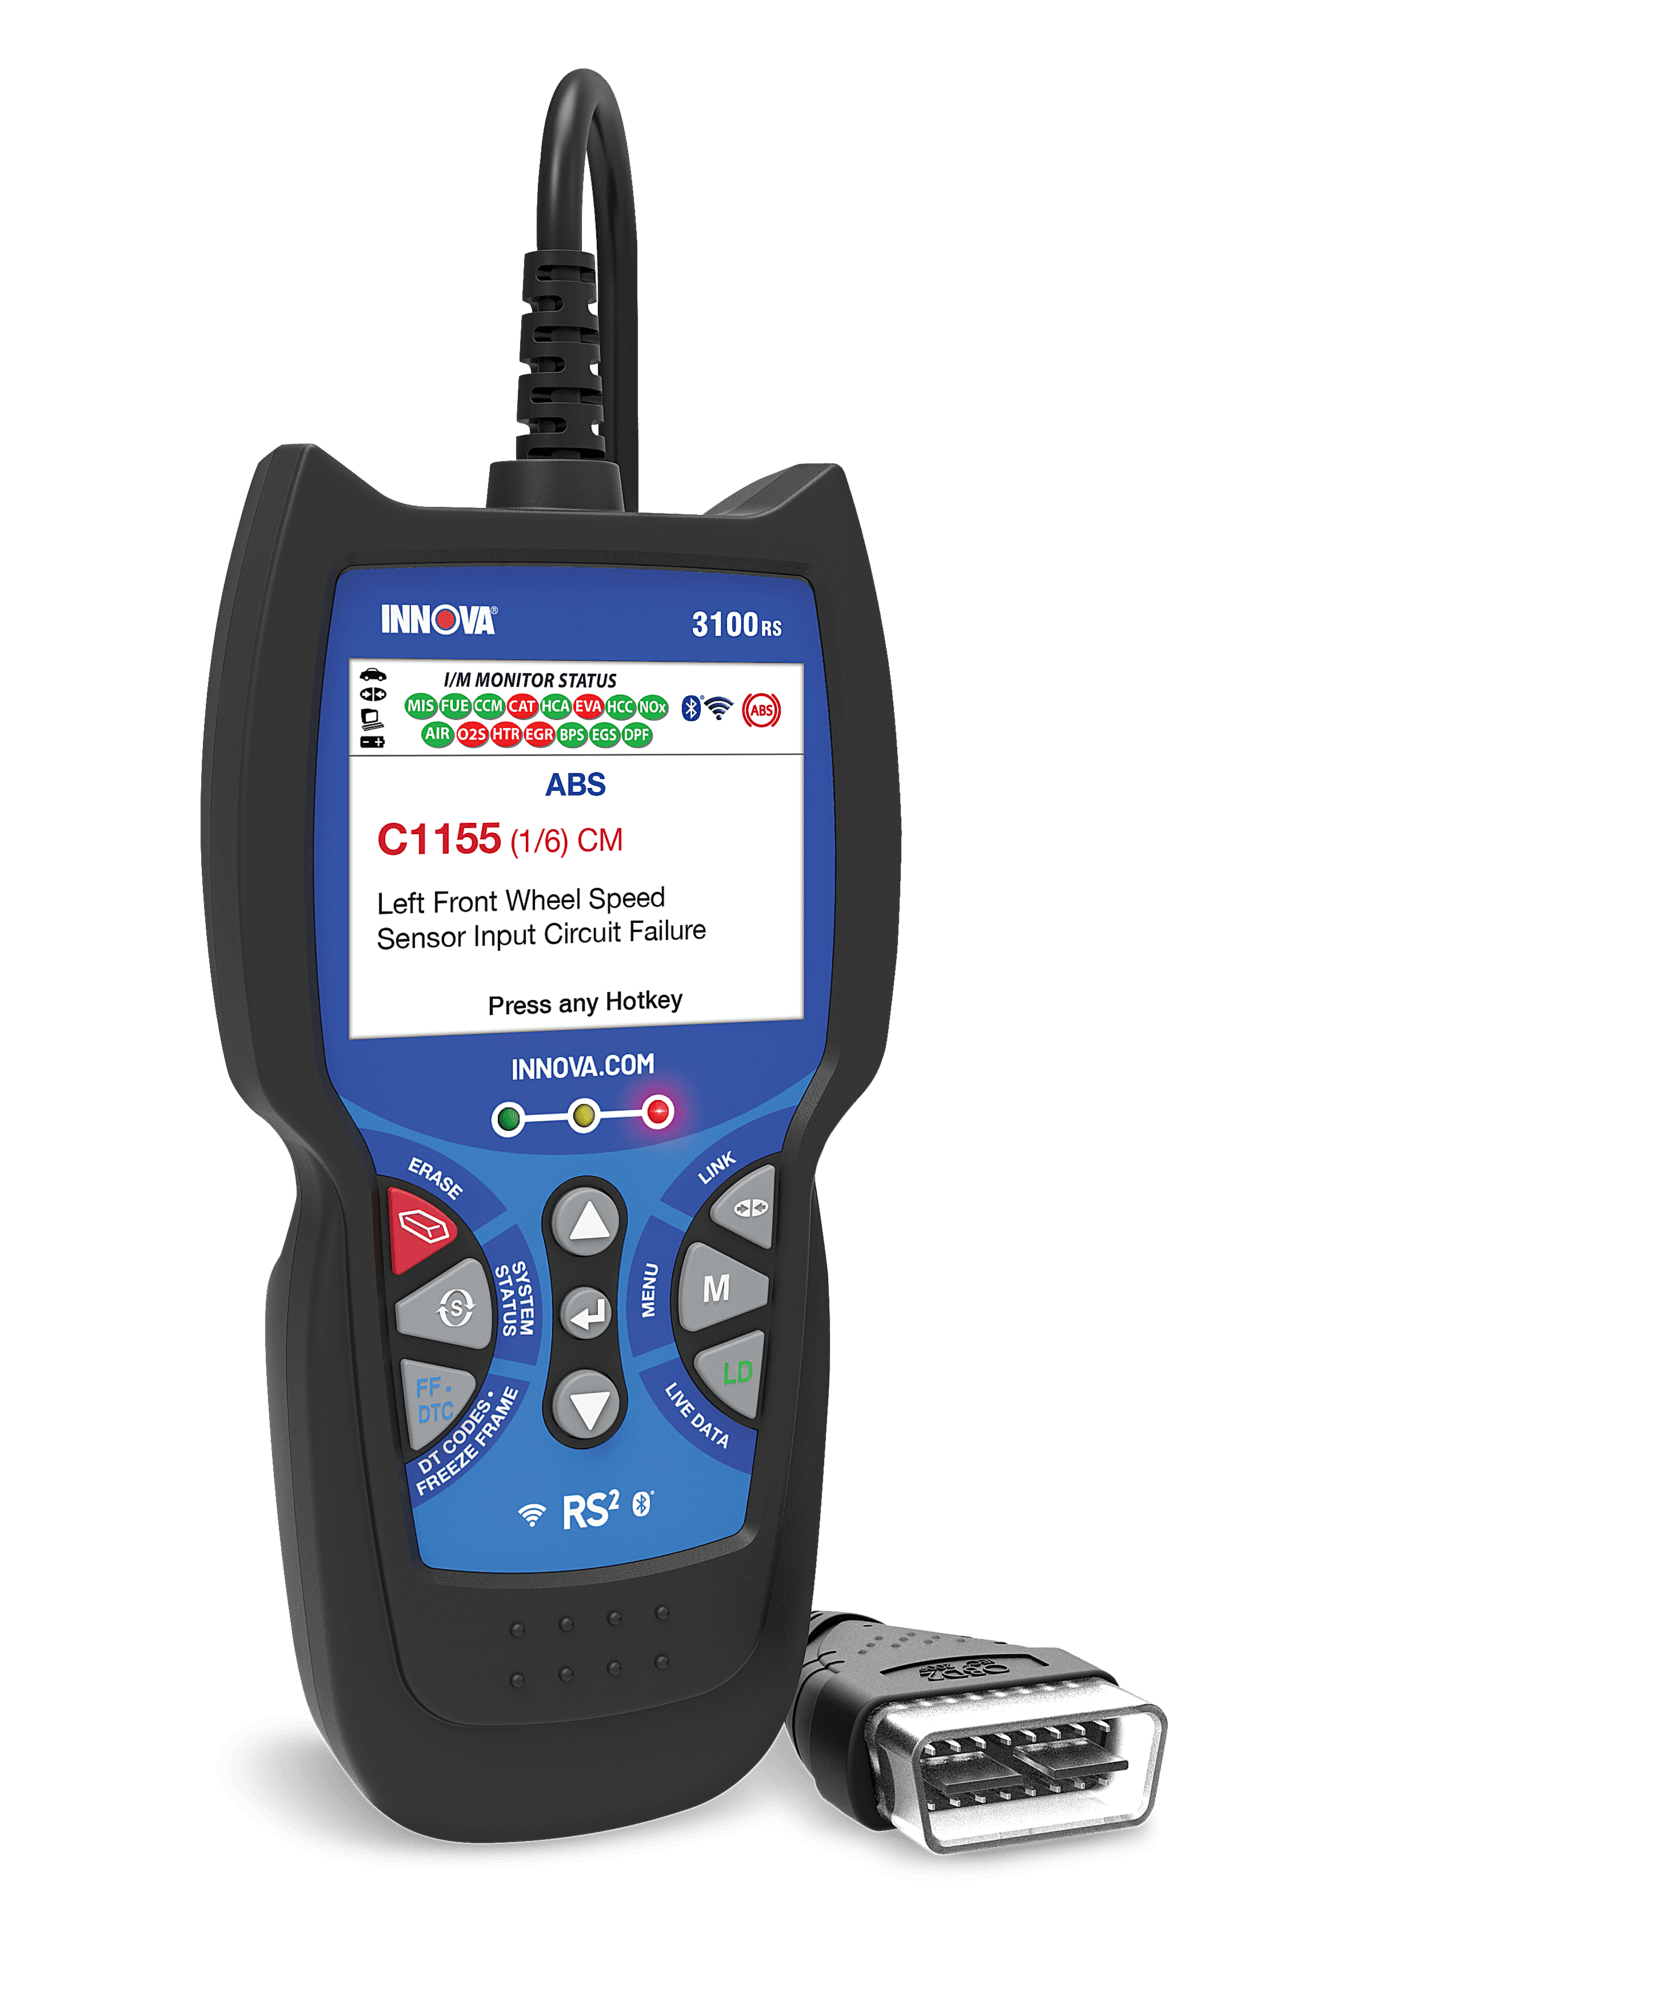 INNOVA 3100 Diagnostic Scan Tool/Code Reader with ABS and Battery Backup for OBD2 Vehicles 